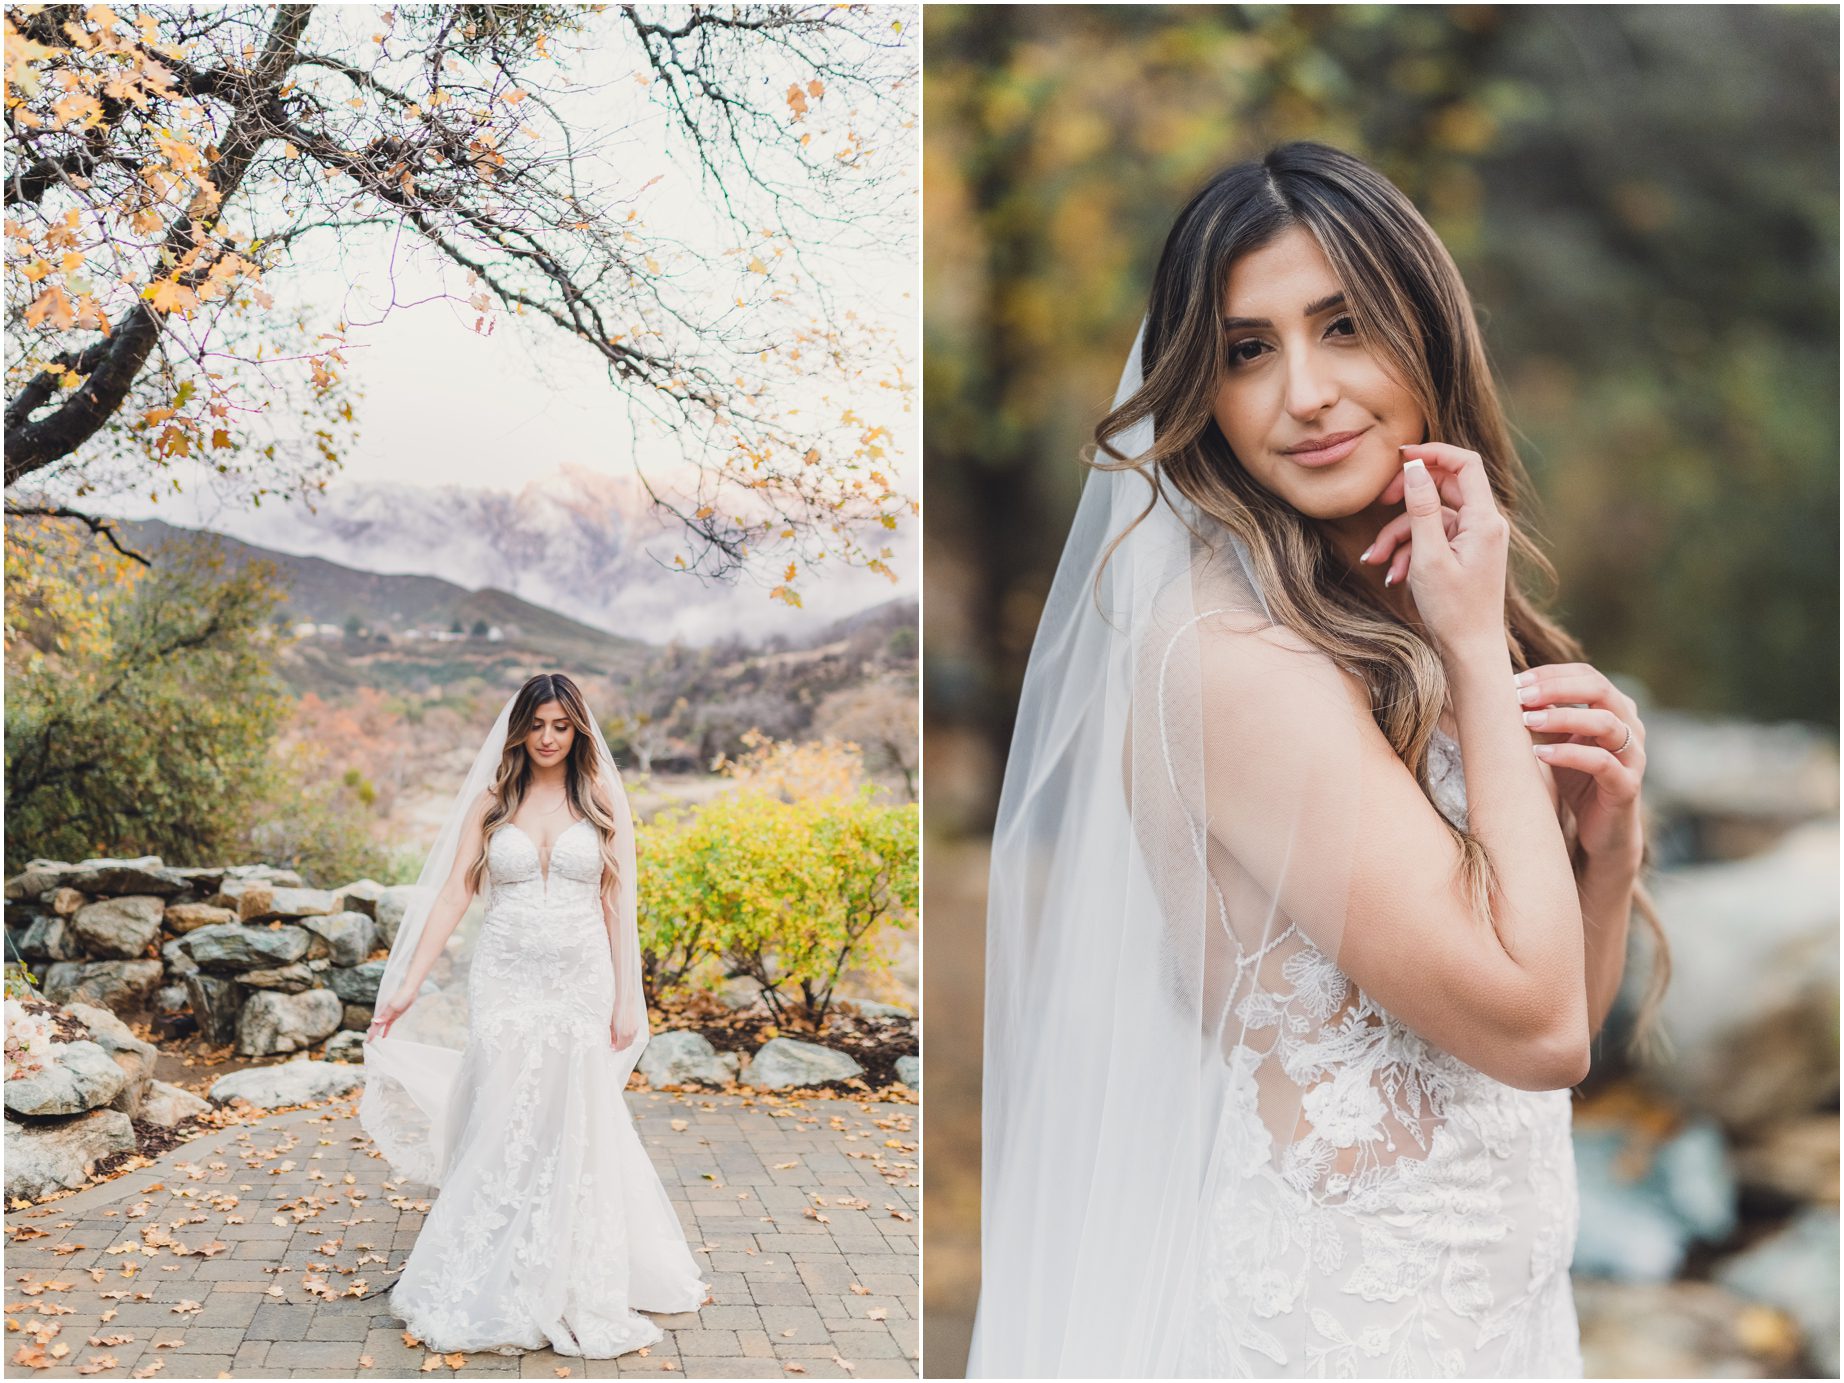 A bride stands elegantly near trees and bushes in Oak Glen